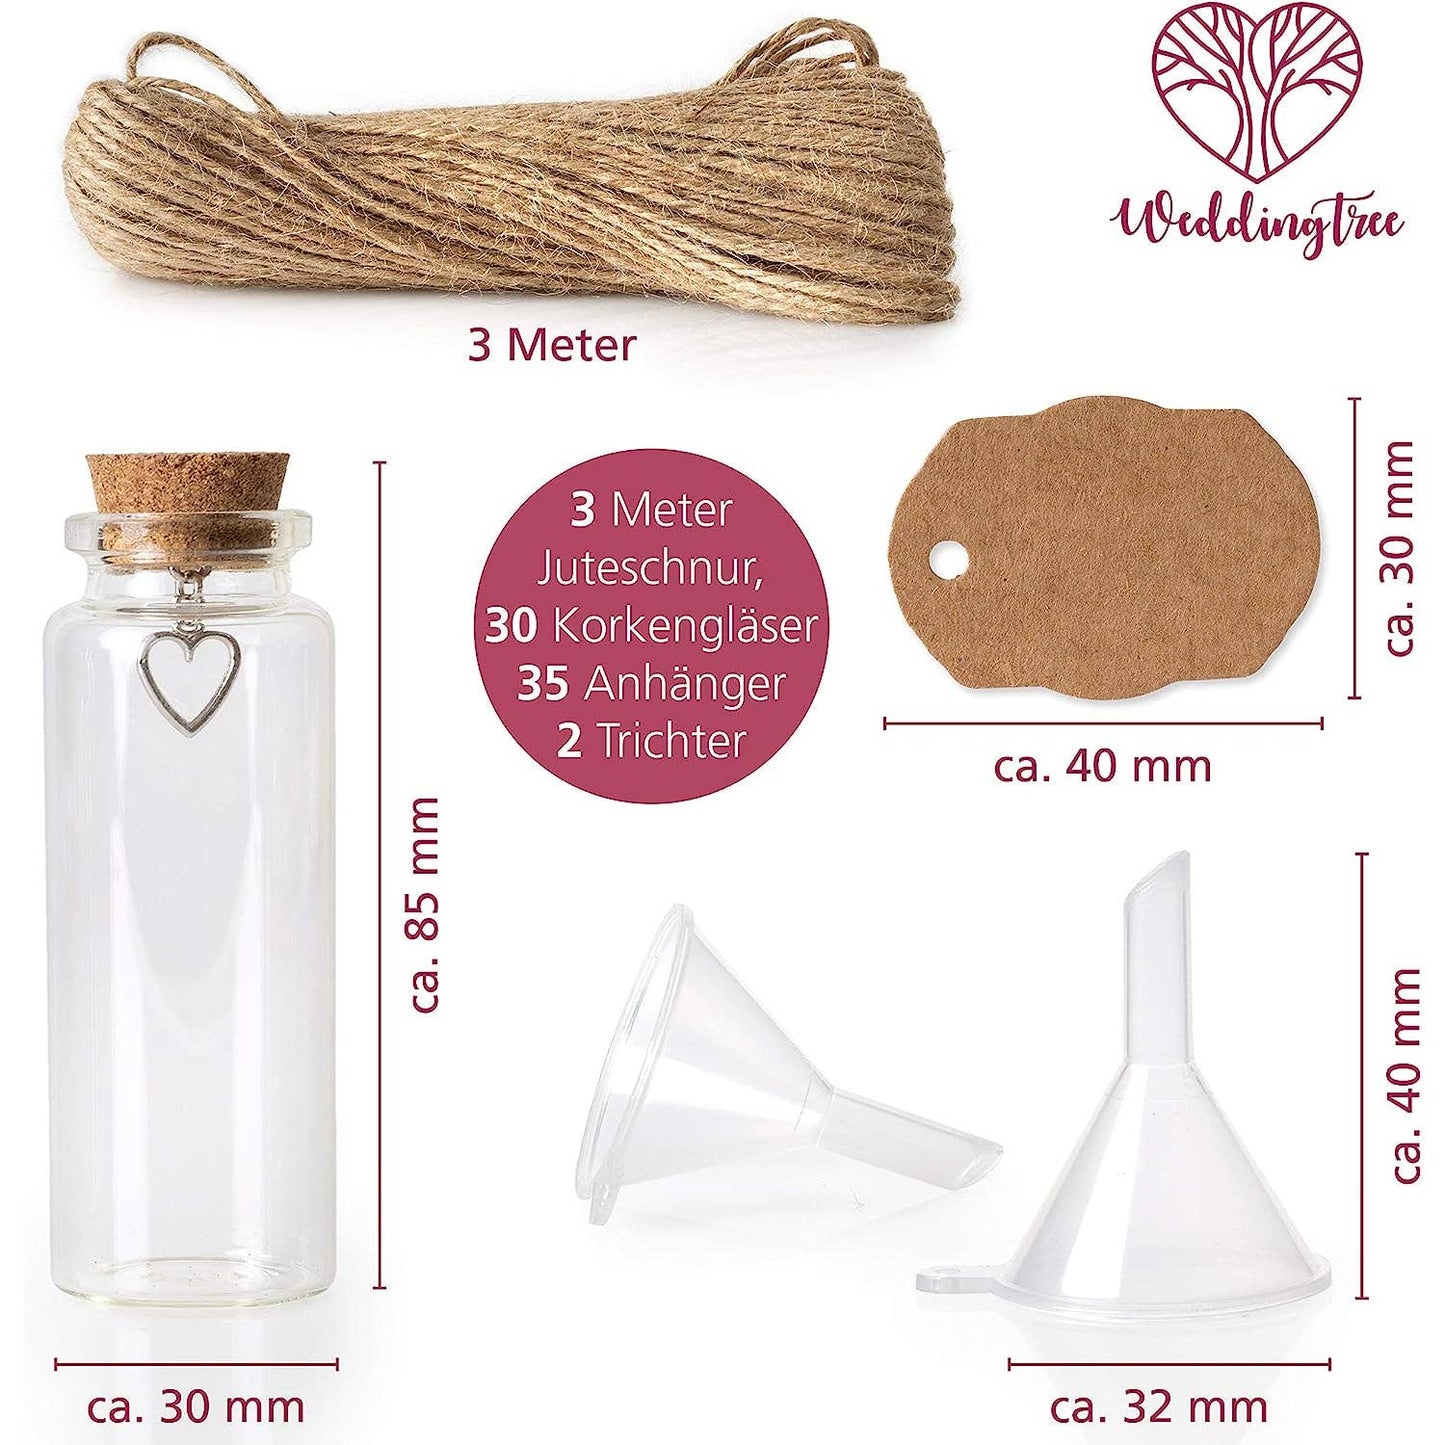 WeddingTree Small Glass Bottles with Cork Lids with Heart Pendant -Funnel